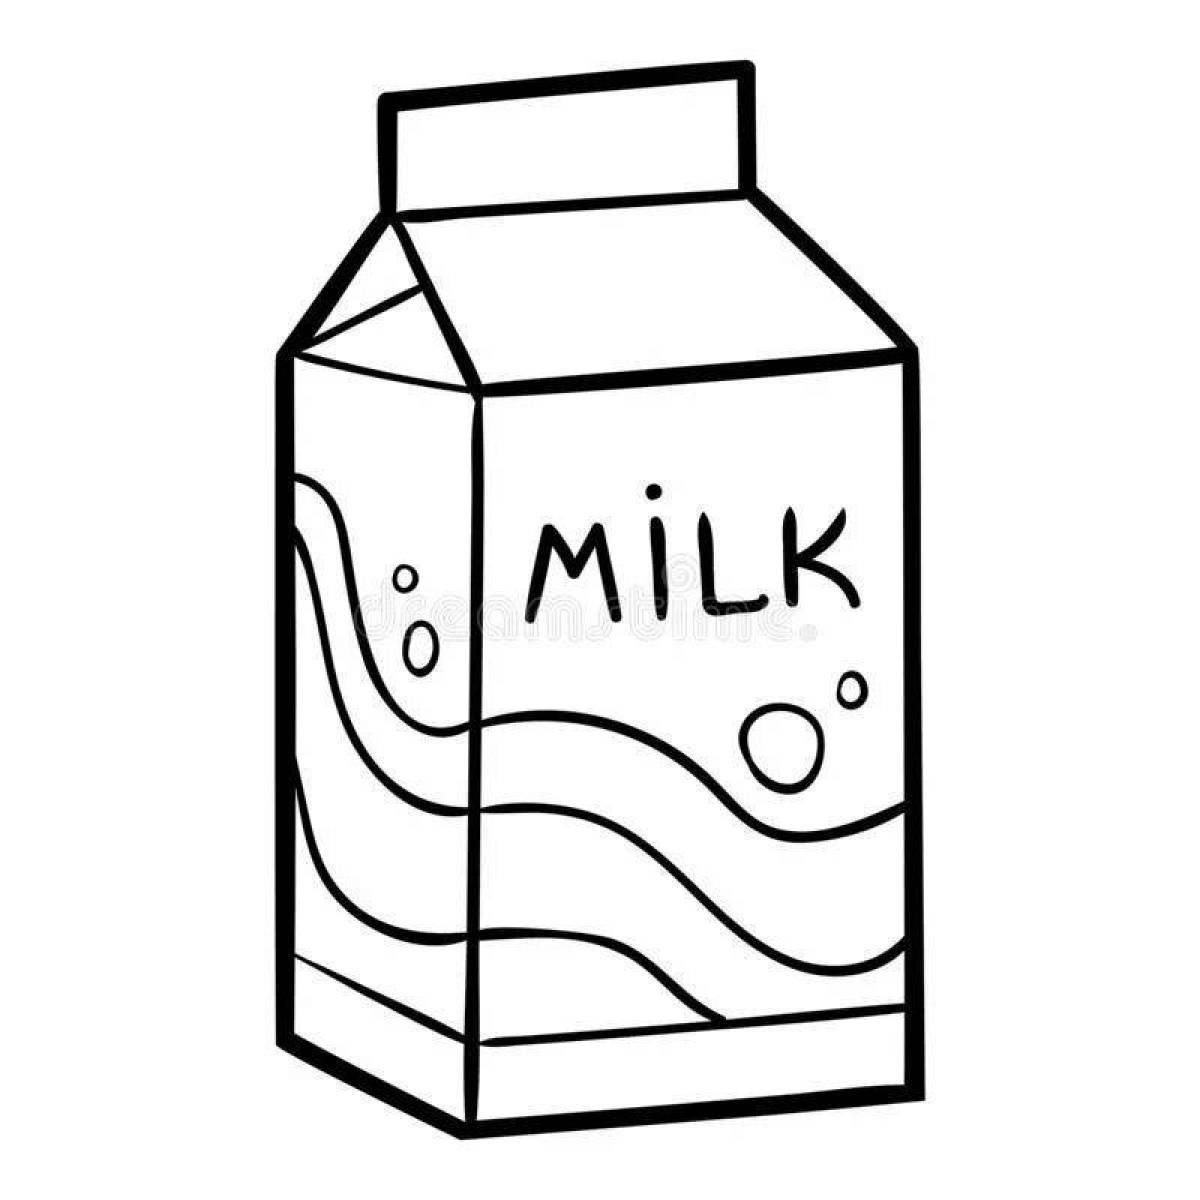 Shining Milk Coloring Page for Toddlers